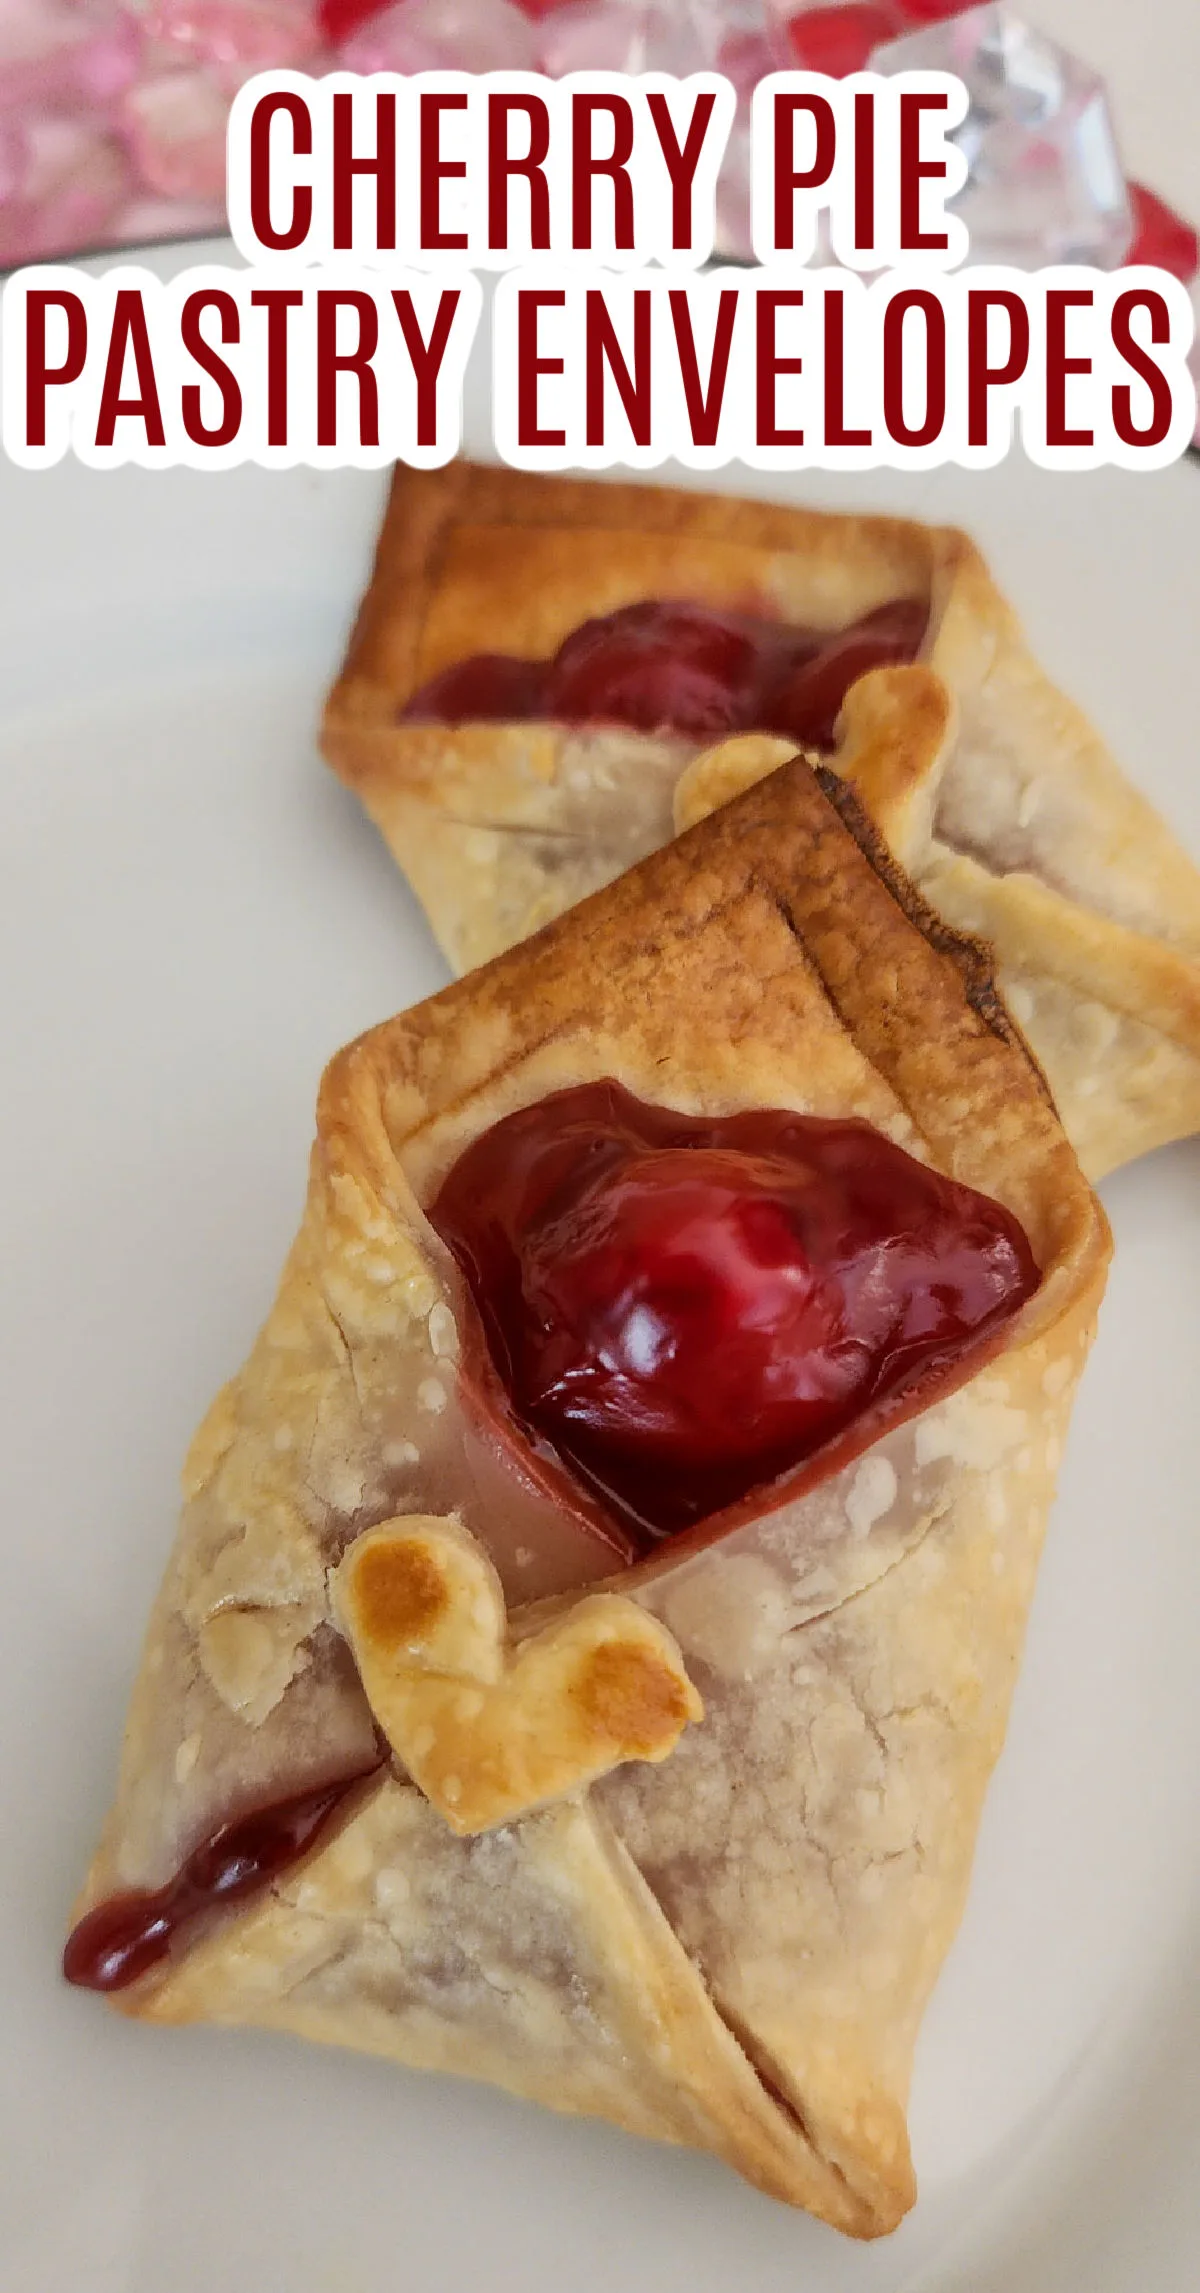 Sample of Cherry Pie Pastry Envelopes on a white plate